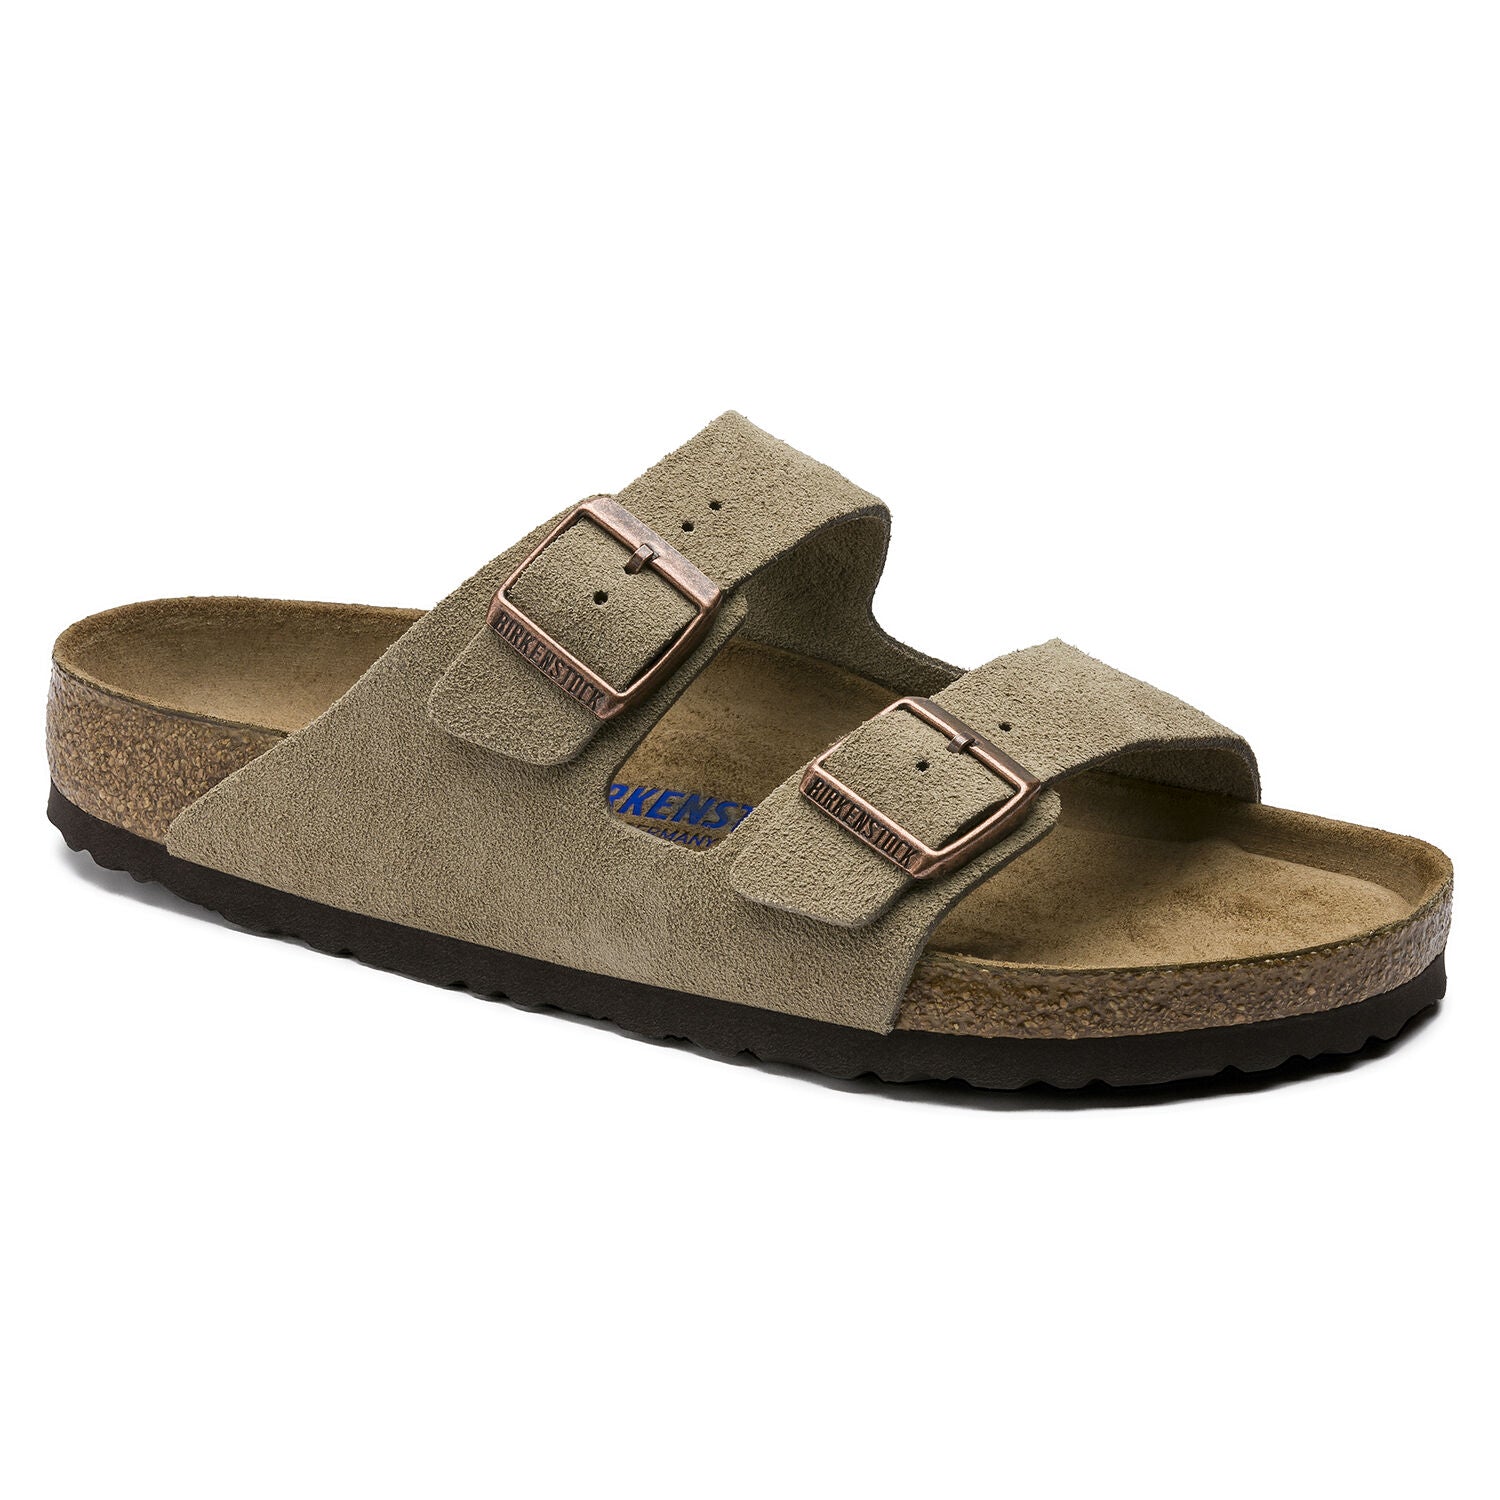 Arizona Suede Leather in Taupe (Soft Footbed - Suede Lined) - Milu James St